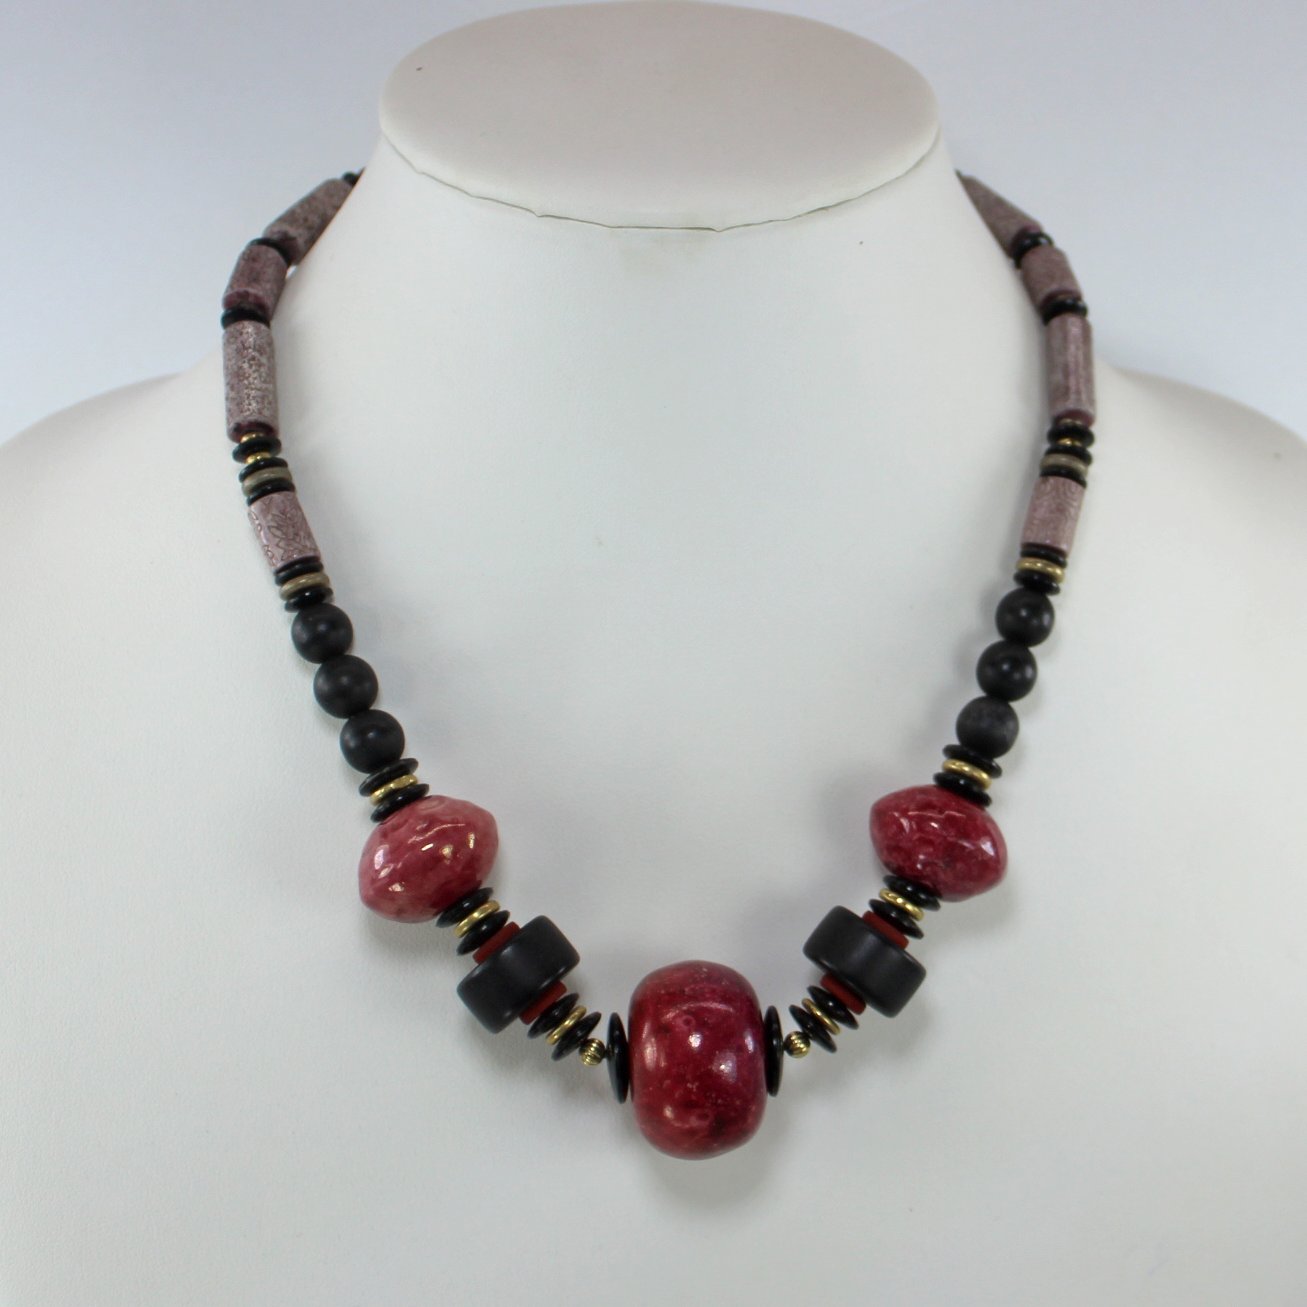 Statement Necklace Outstanding Colors Mauve Raspberry Black Beads Large Round Tube Japan